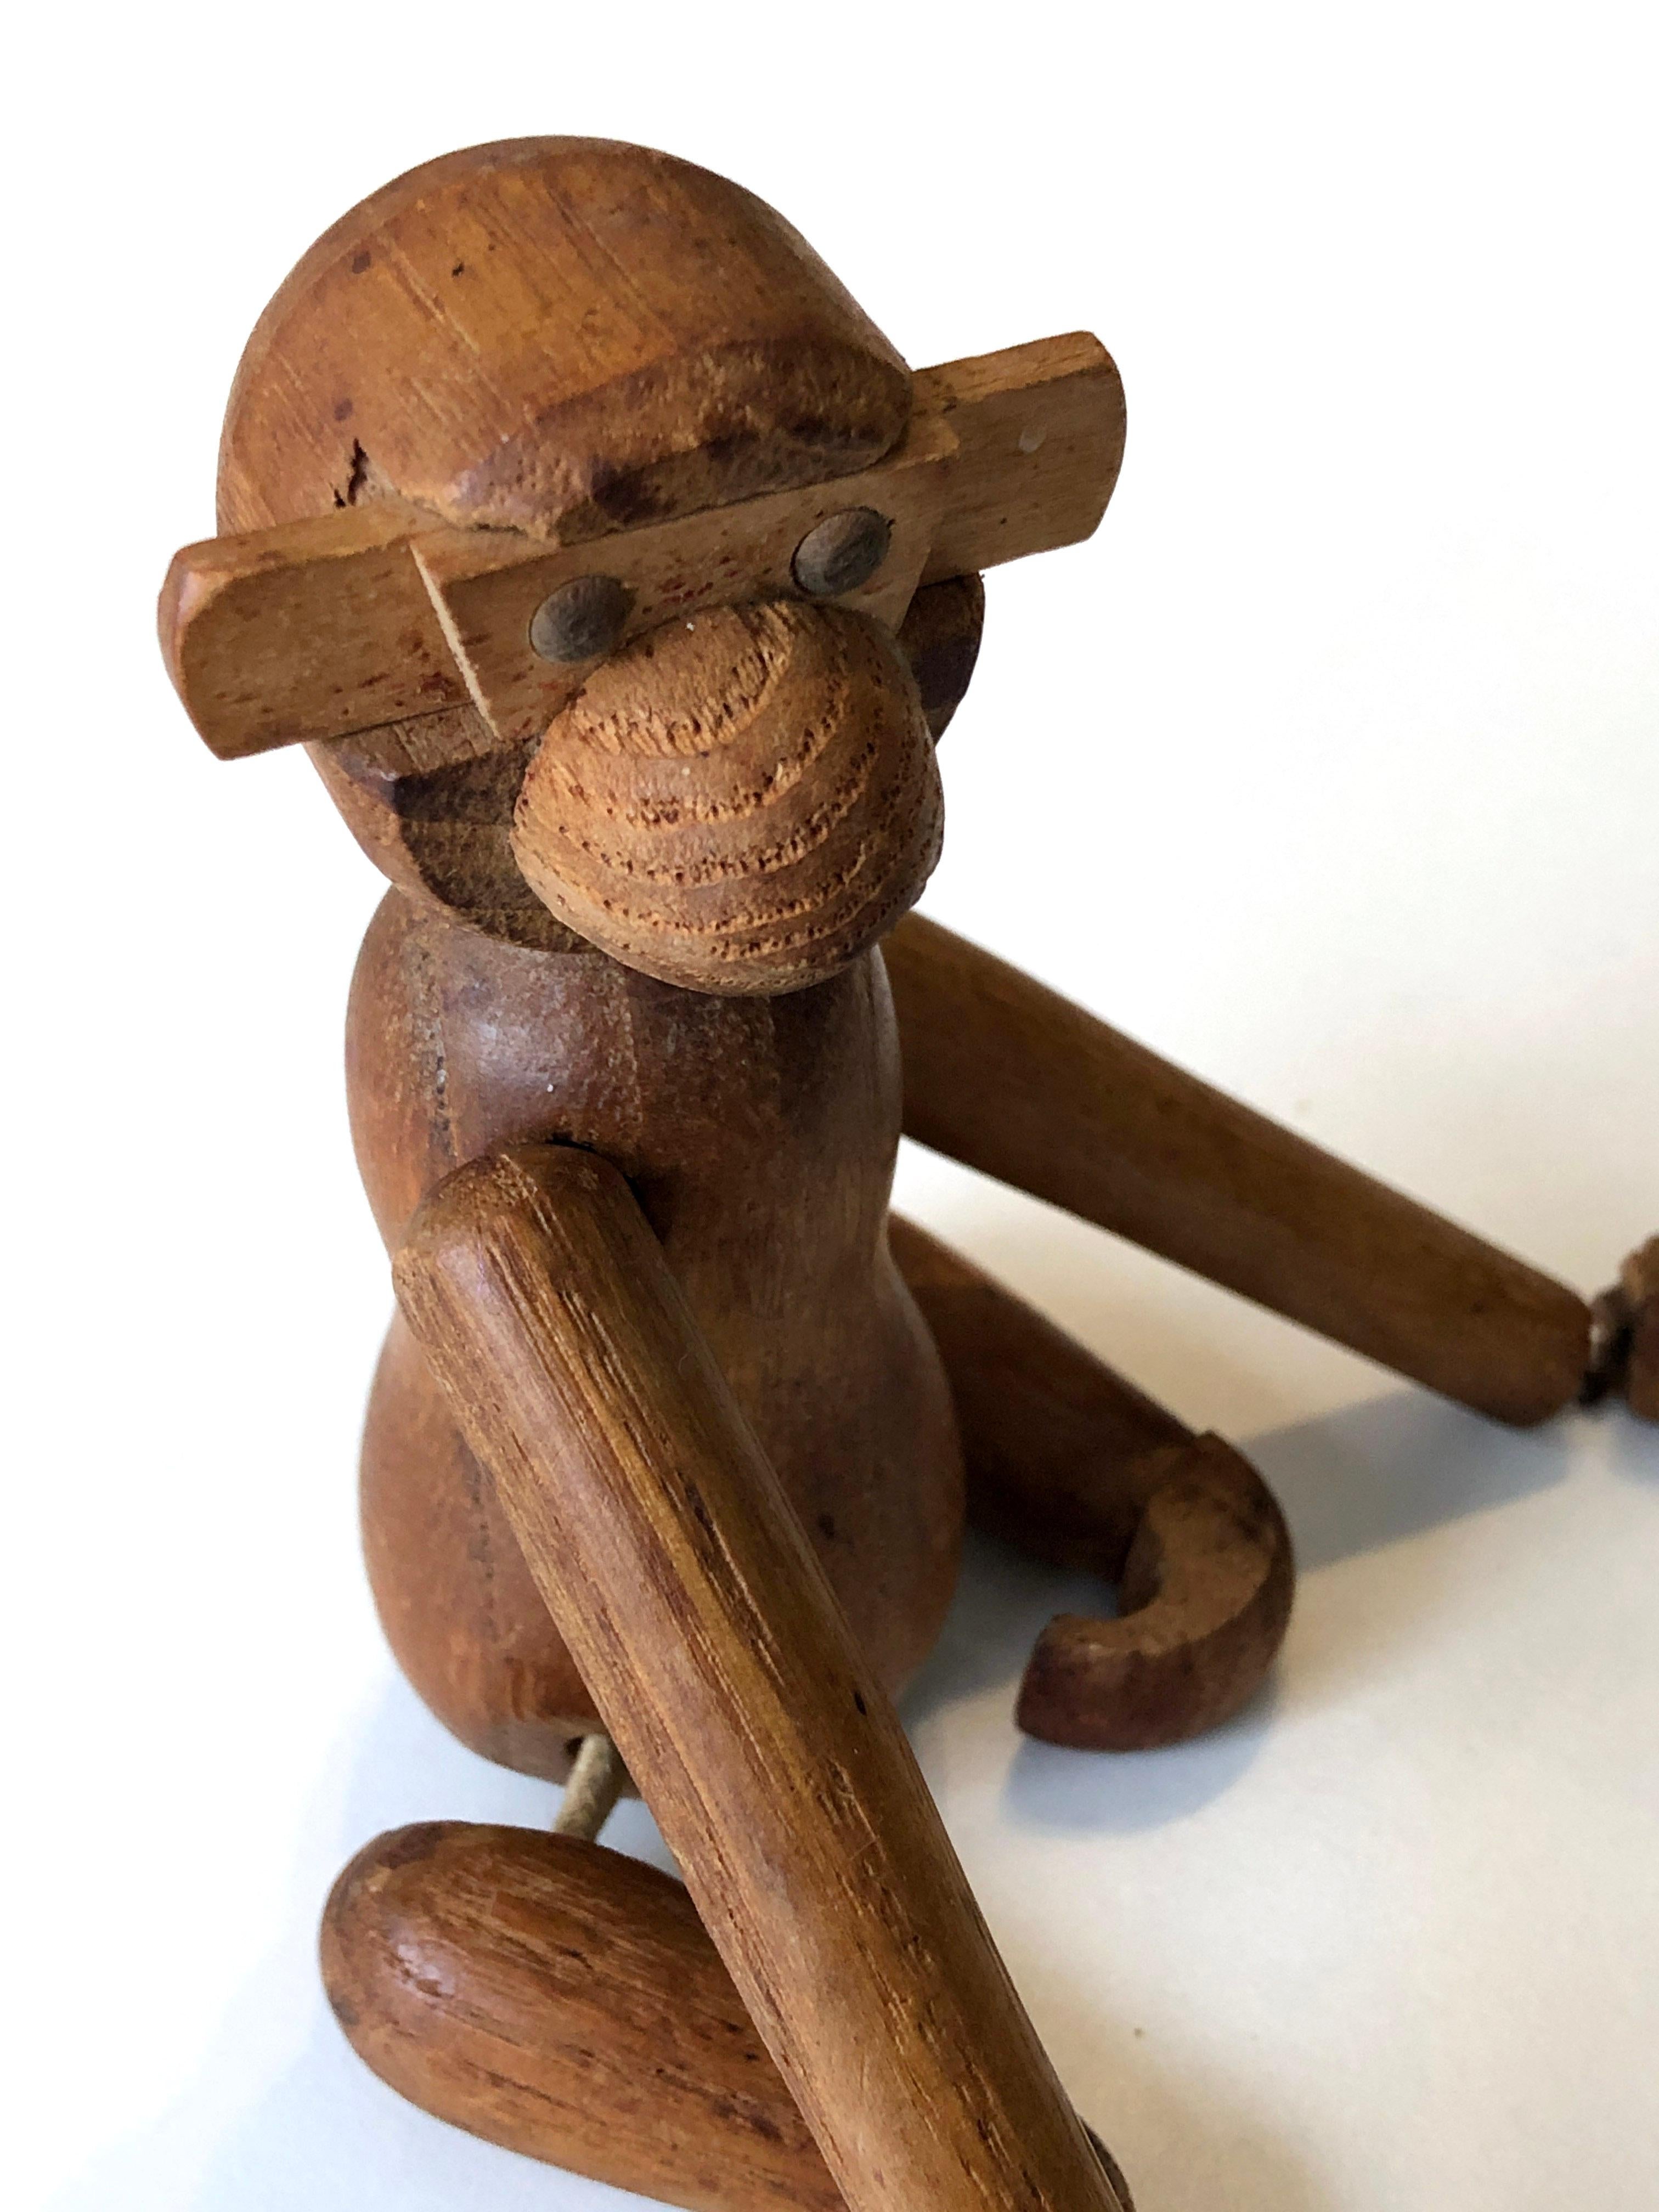 Vintage 1950's small wooden monkey - Kay Bojesen style For Sale 8